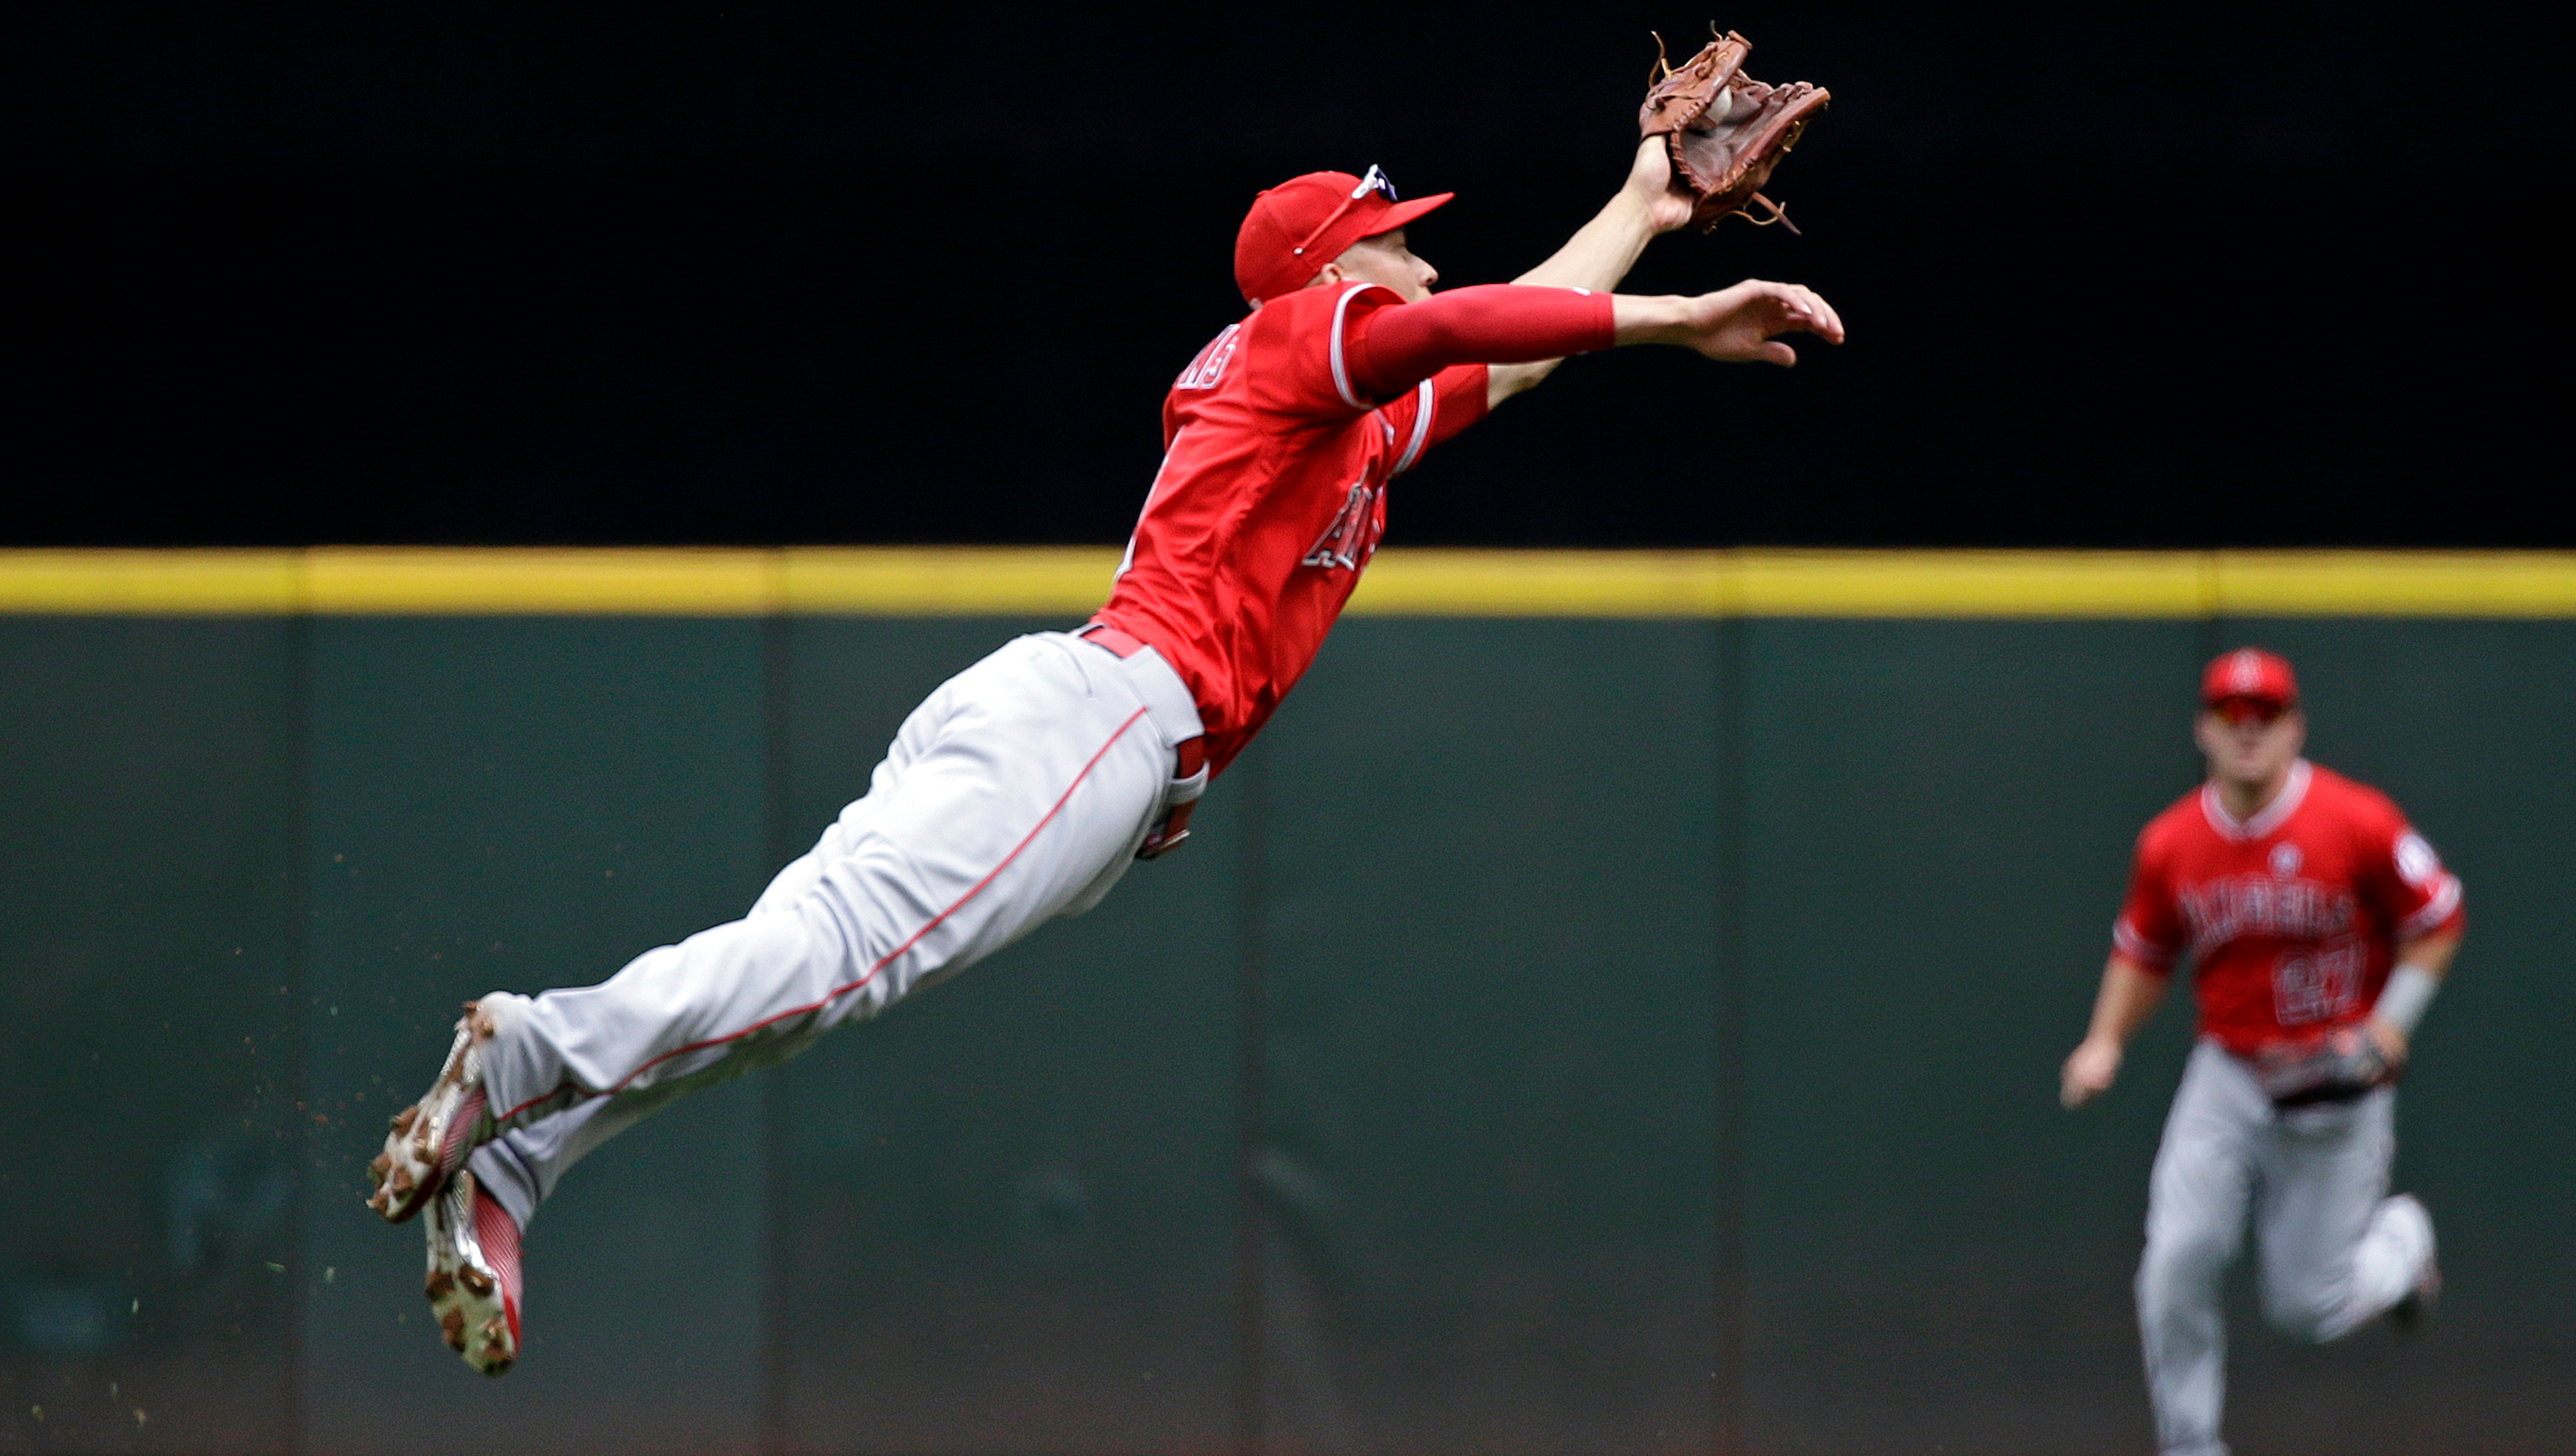 Los Angeles Angels - All you need is glove and the Andrelton